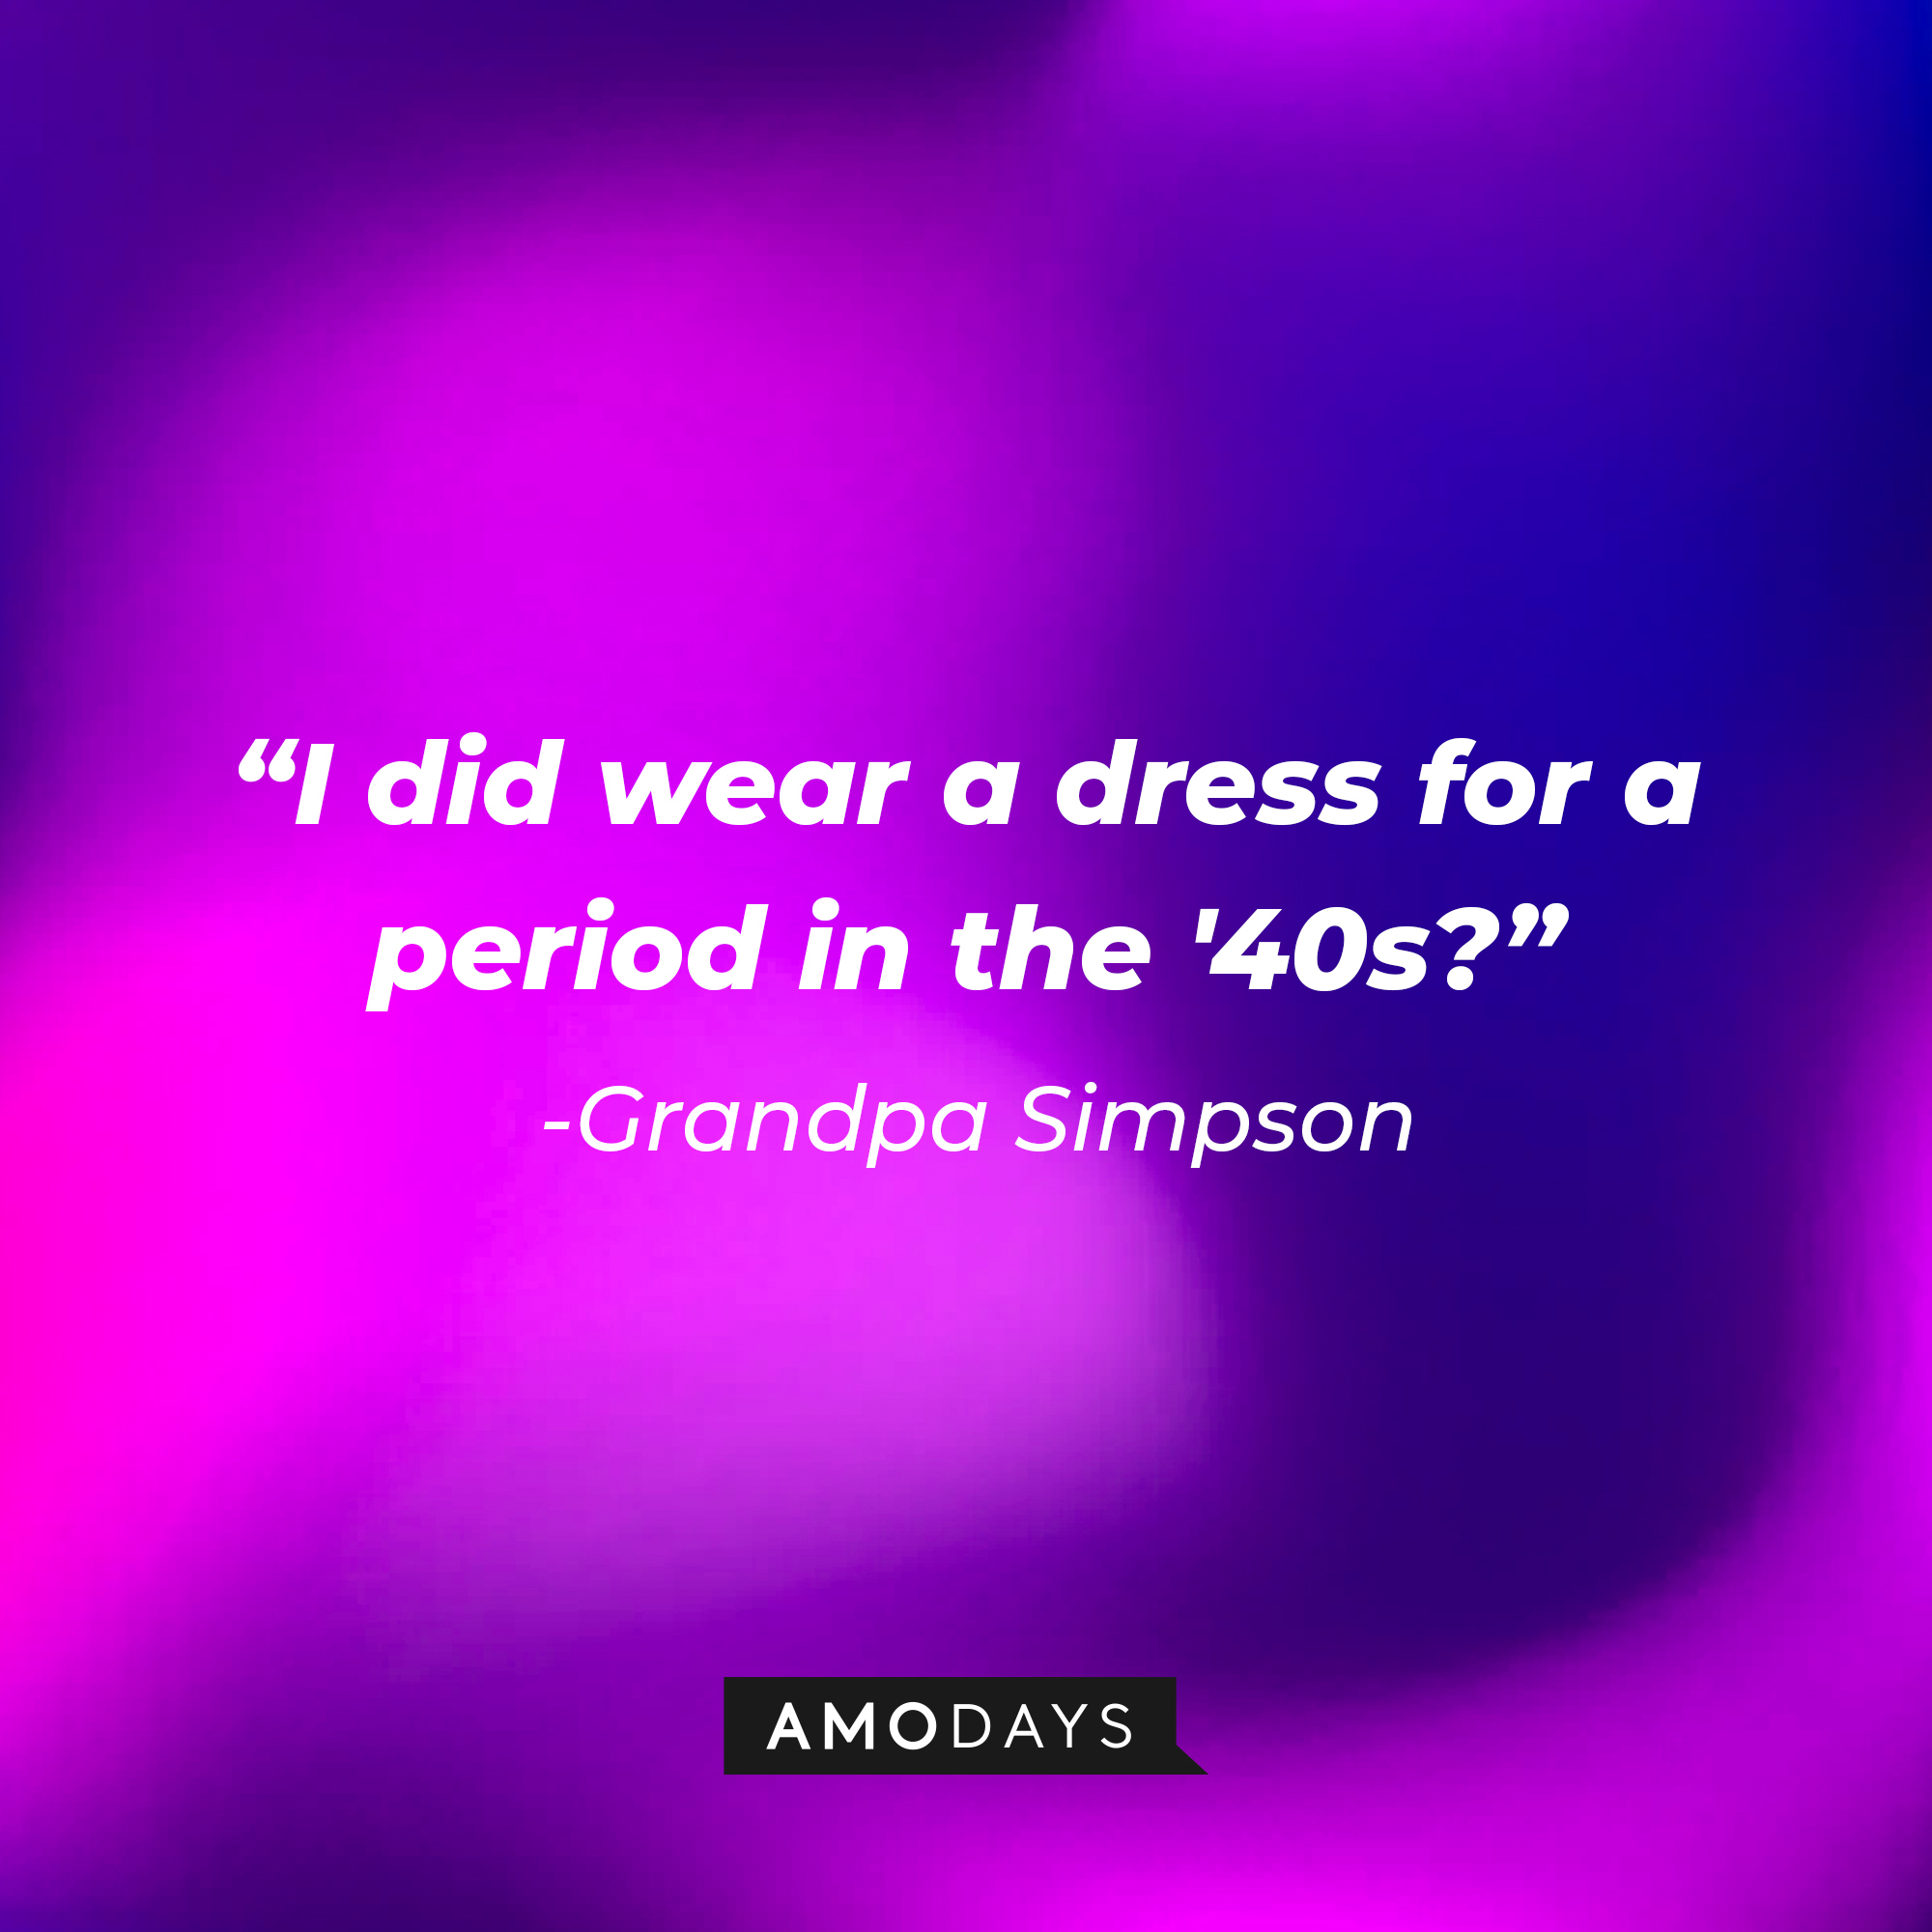 Grandpa Simpson's quote: “I did wear a dress for a period in the '40s?” | Source: AmoDays